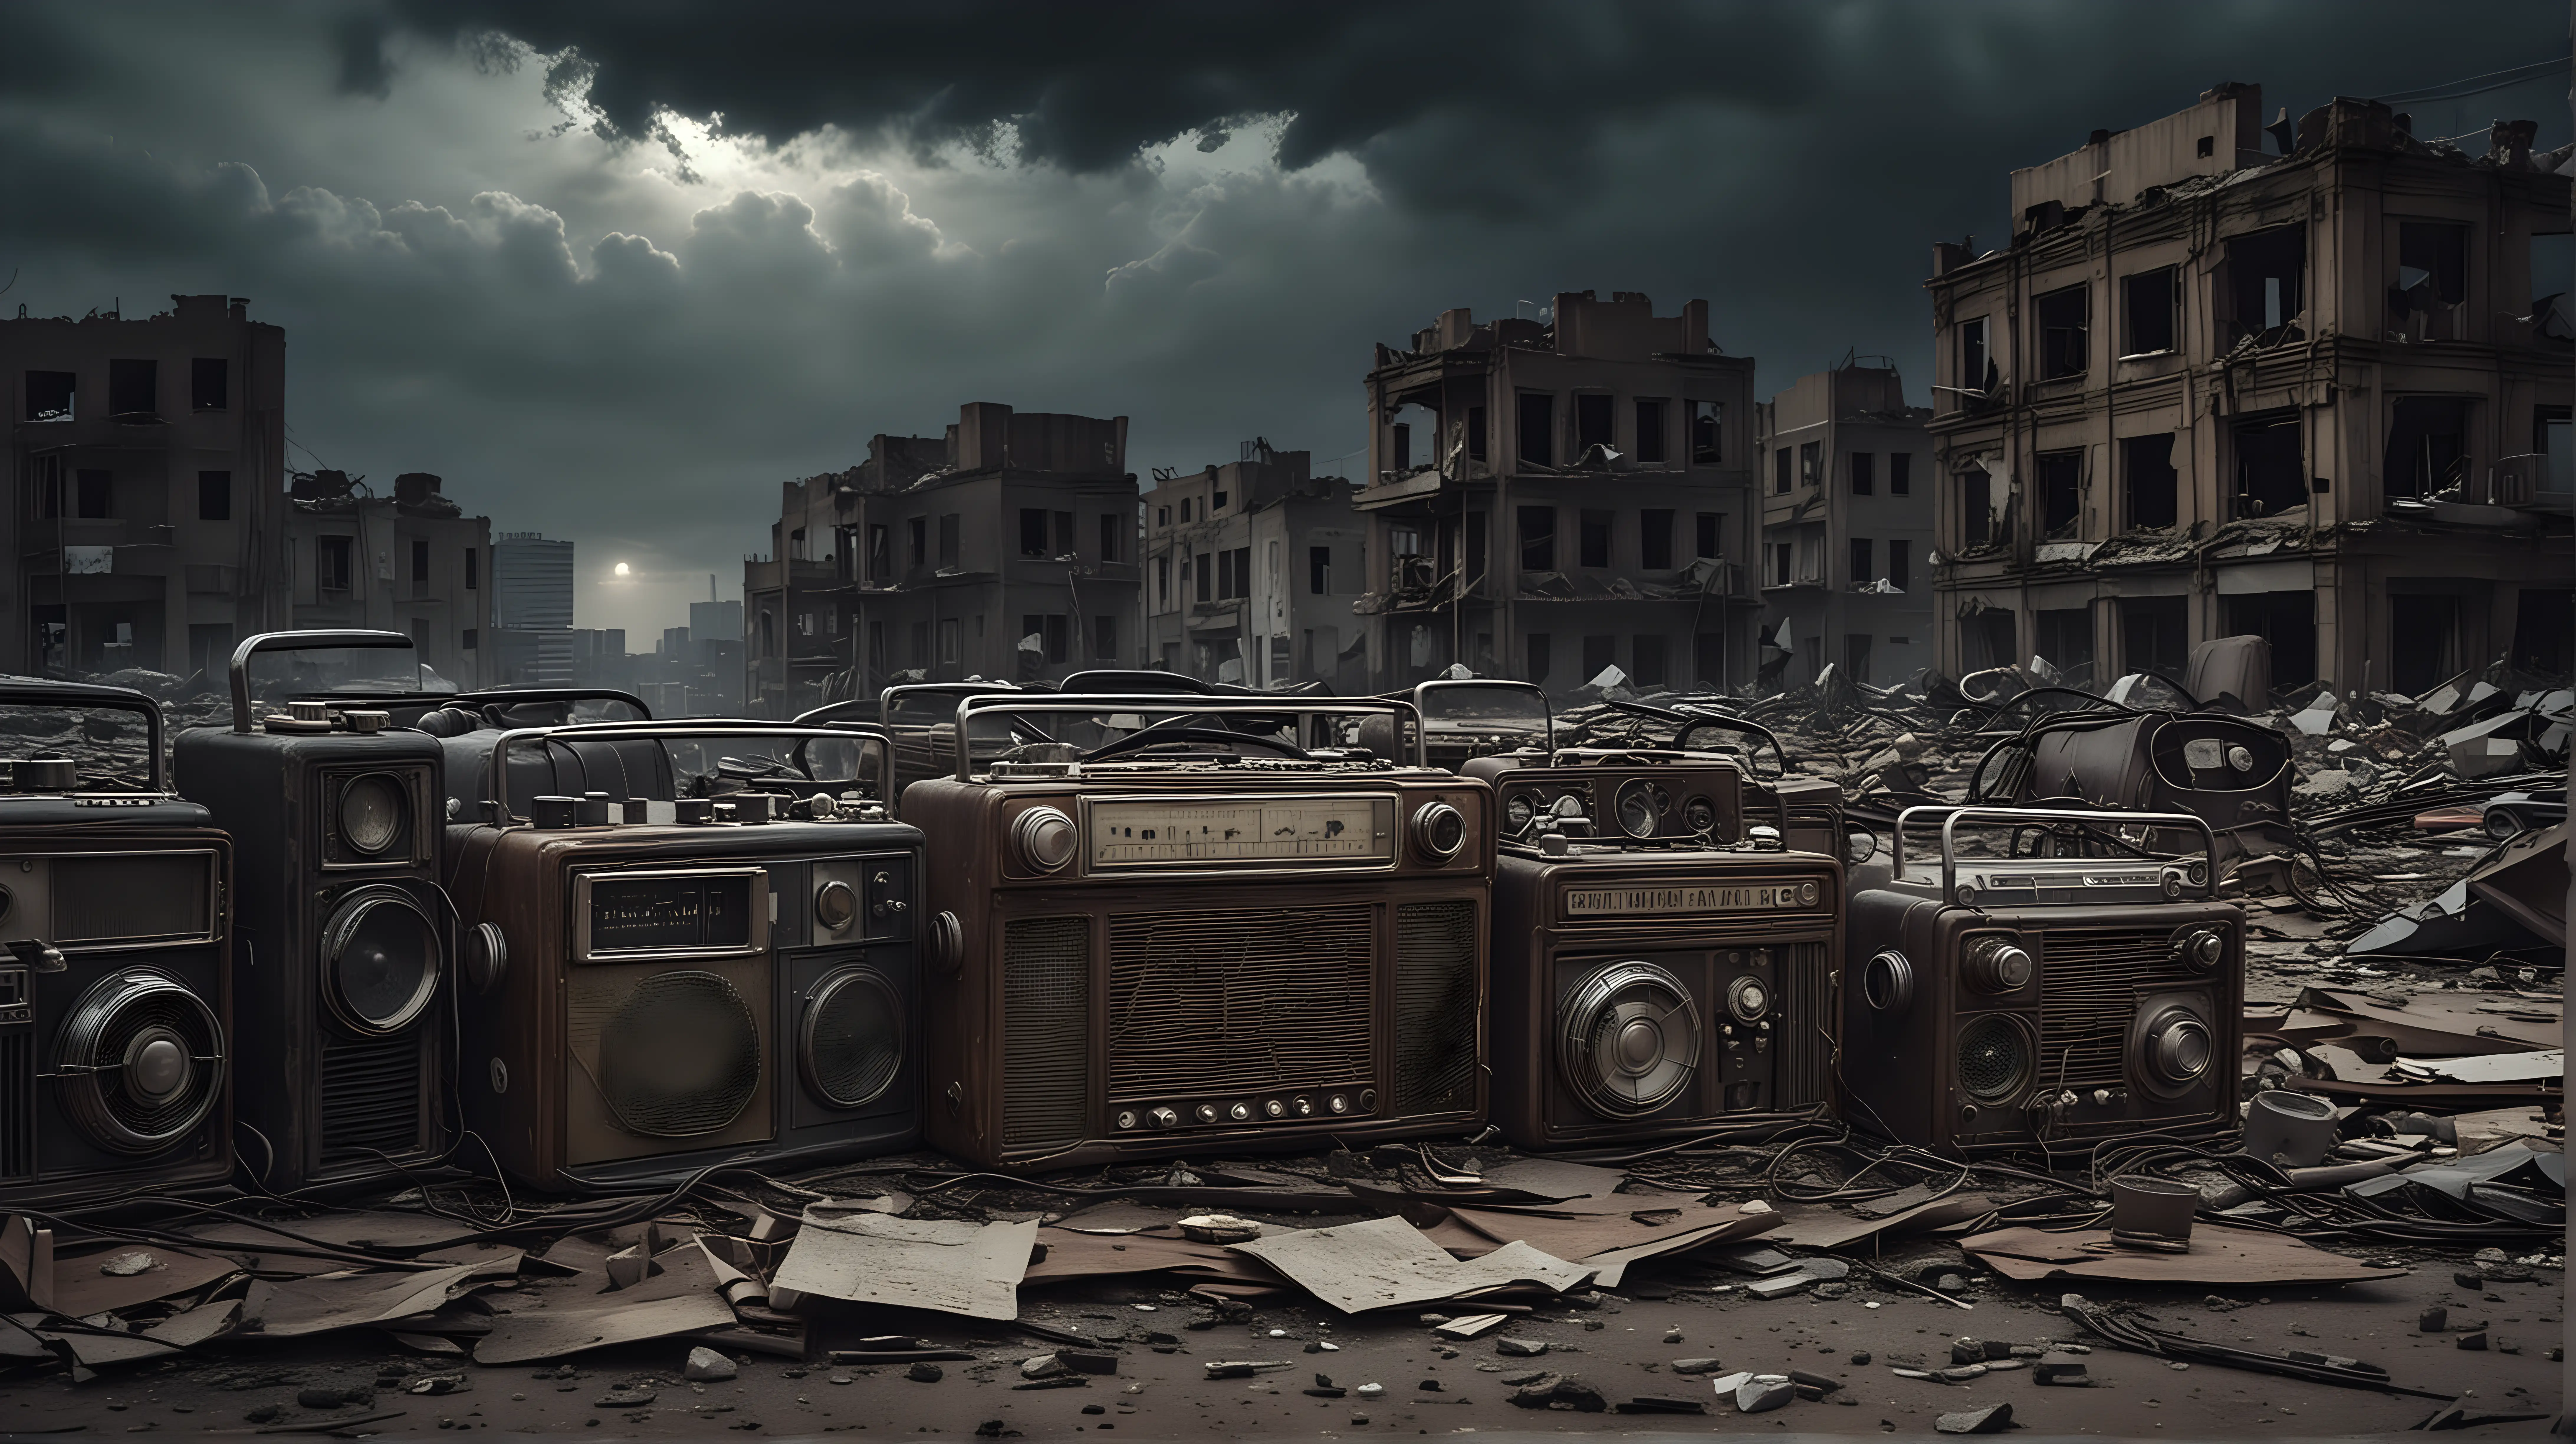 Create an image of a pile of vintage old time radios in the street of an abandoned city that has been destroyed by a nuclear war. It is night and the sky is filled with dark clouds, and the city ruins convey a sense of dread and horror. Cinematic lighting.